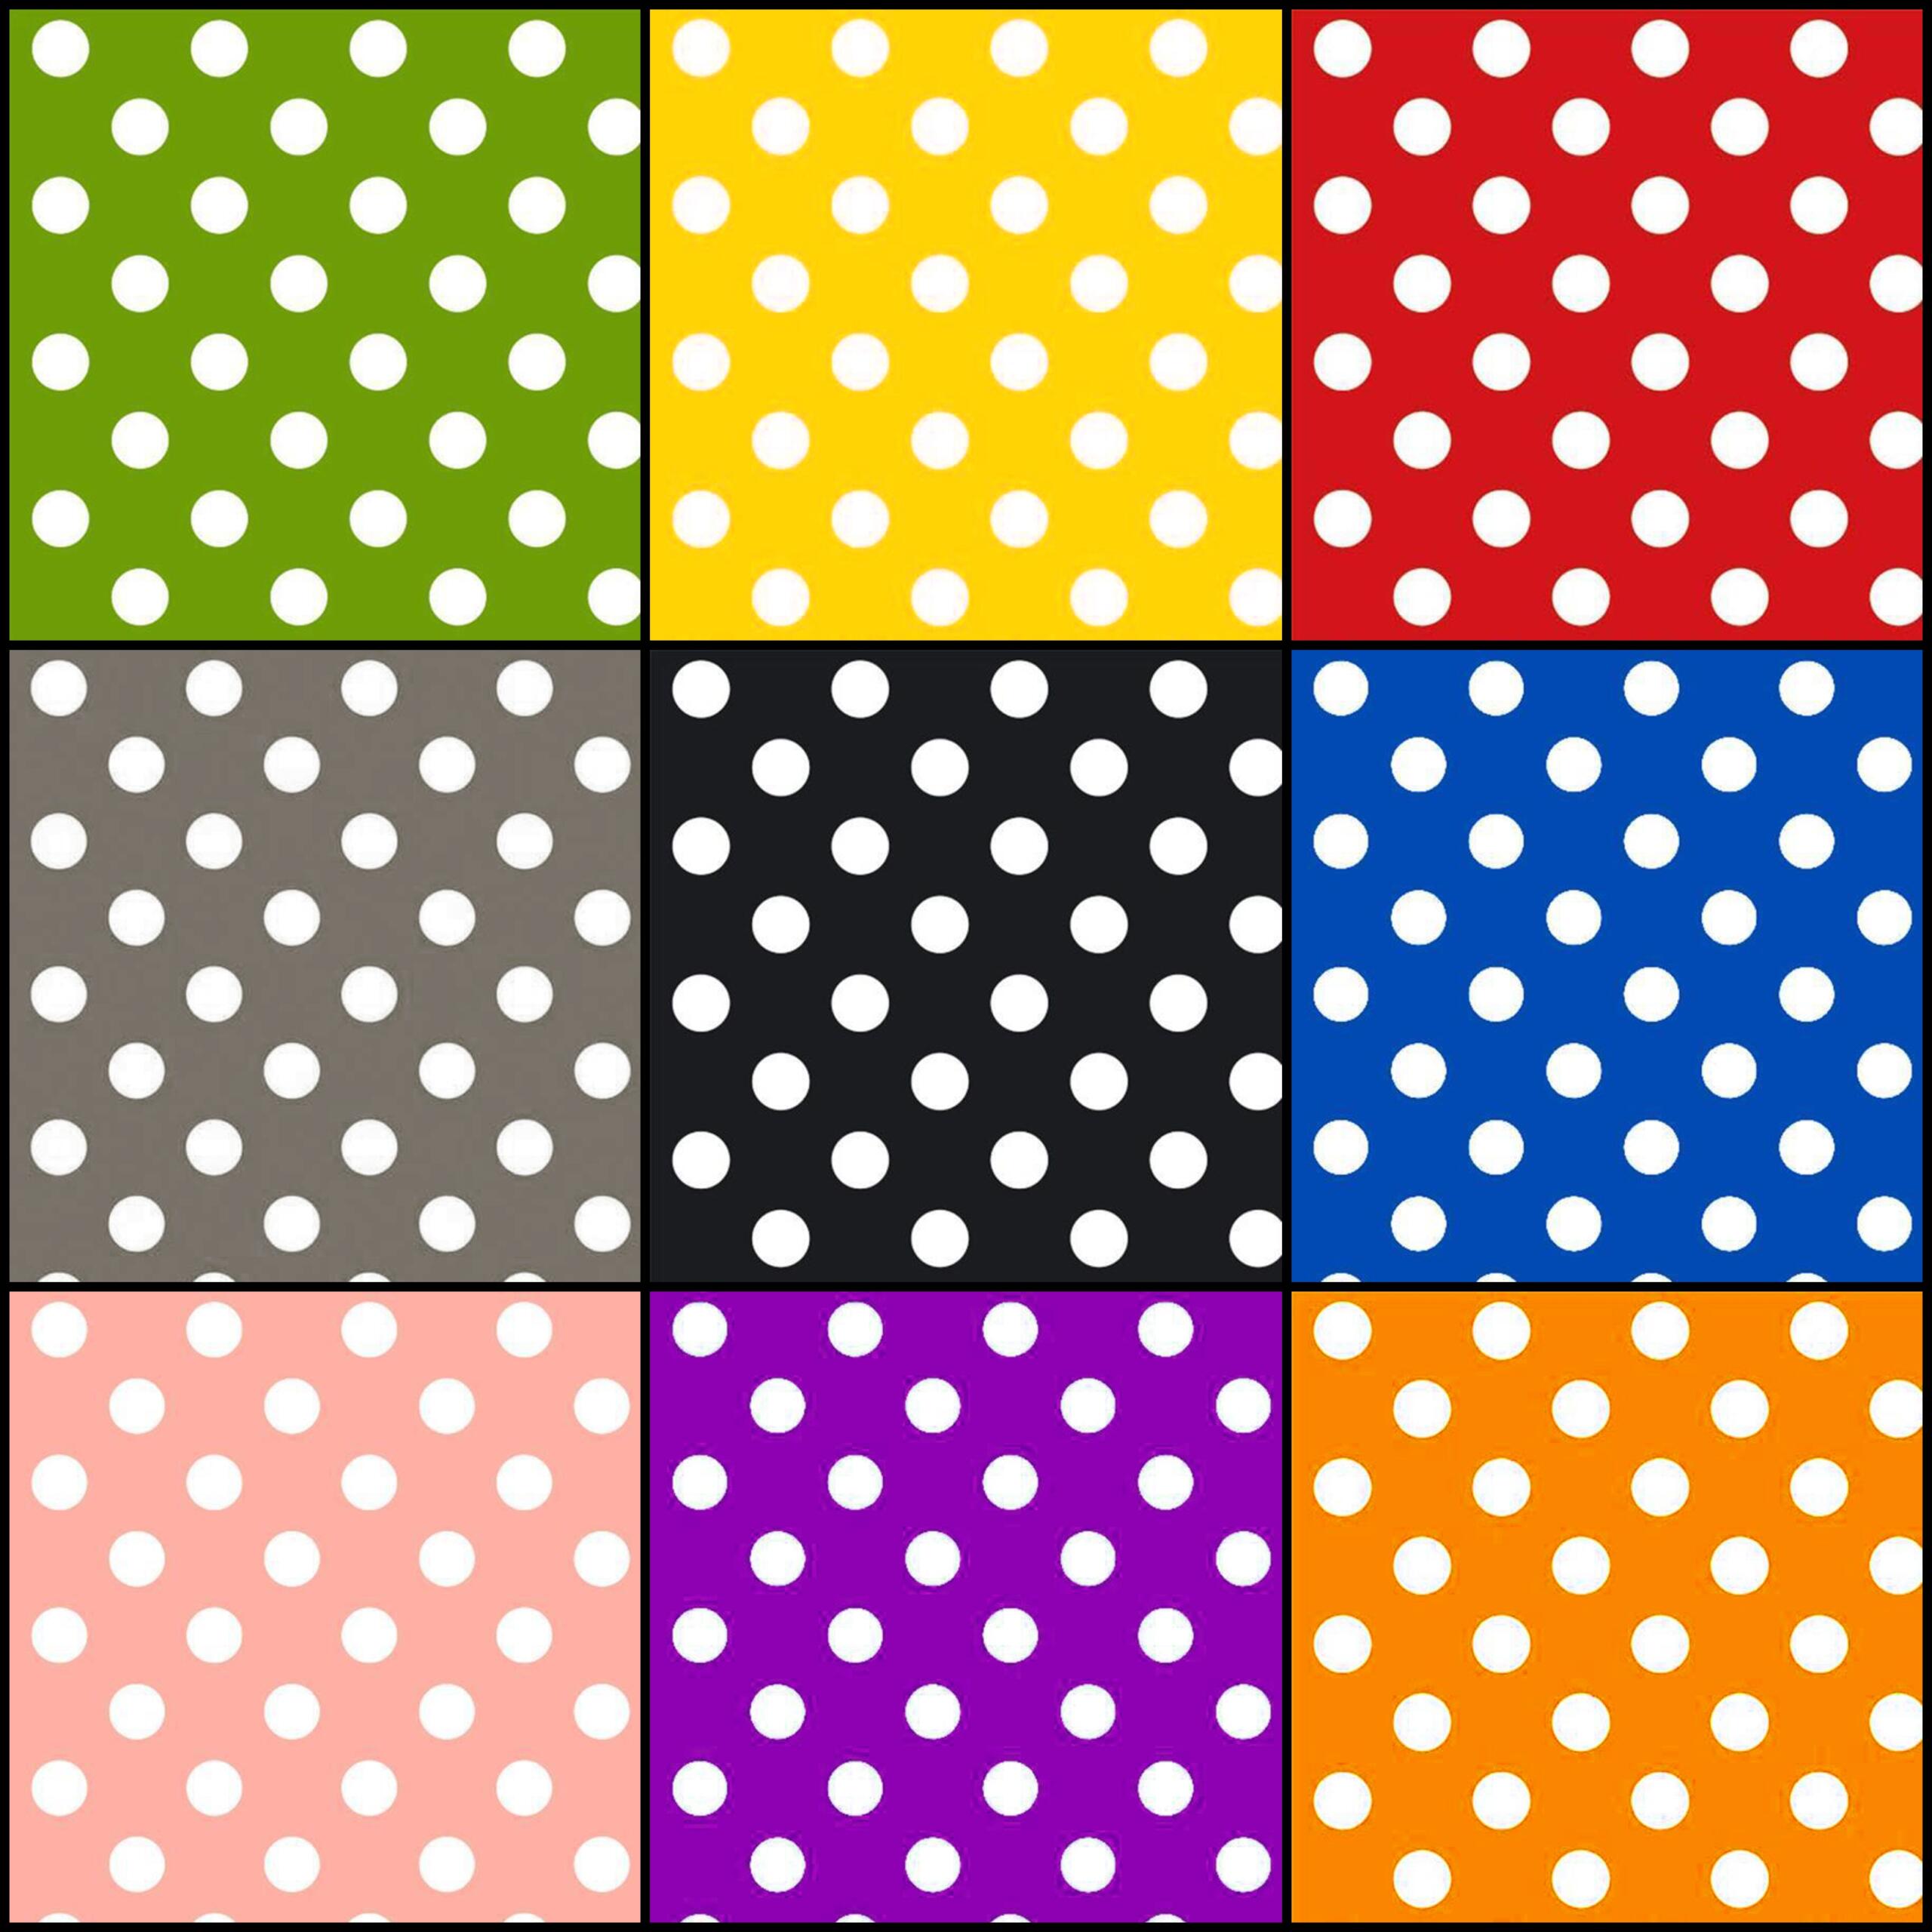 Polka Dot Table Cloth Fabric | 55 Inch Wide | PVC Plastic | - Discount ...